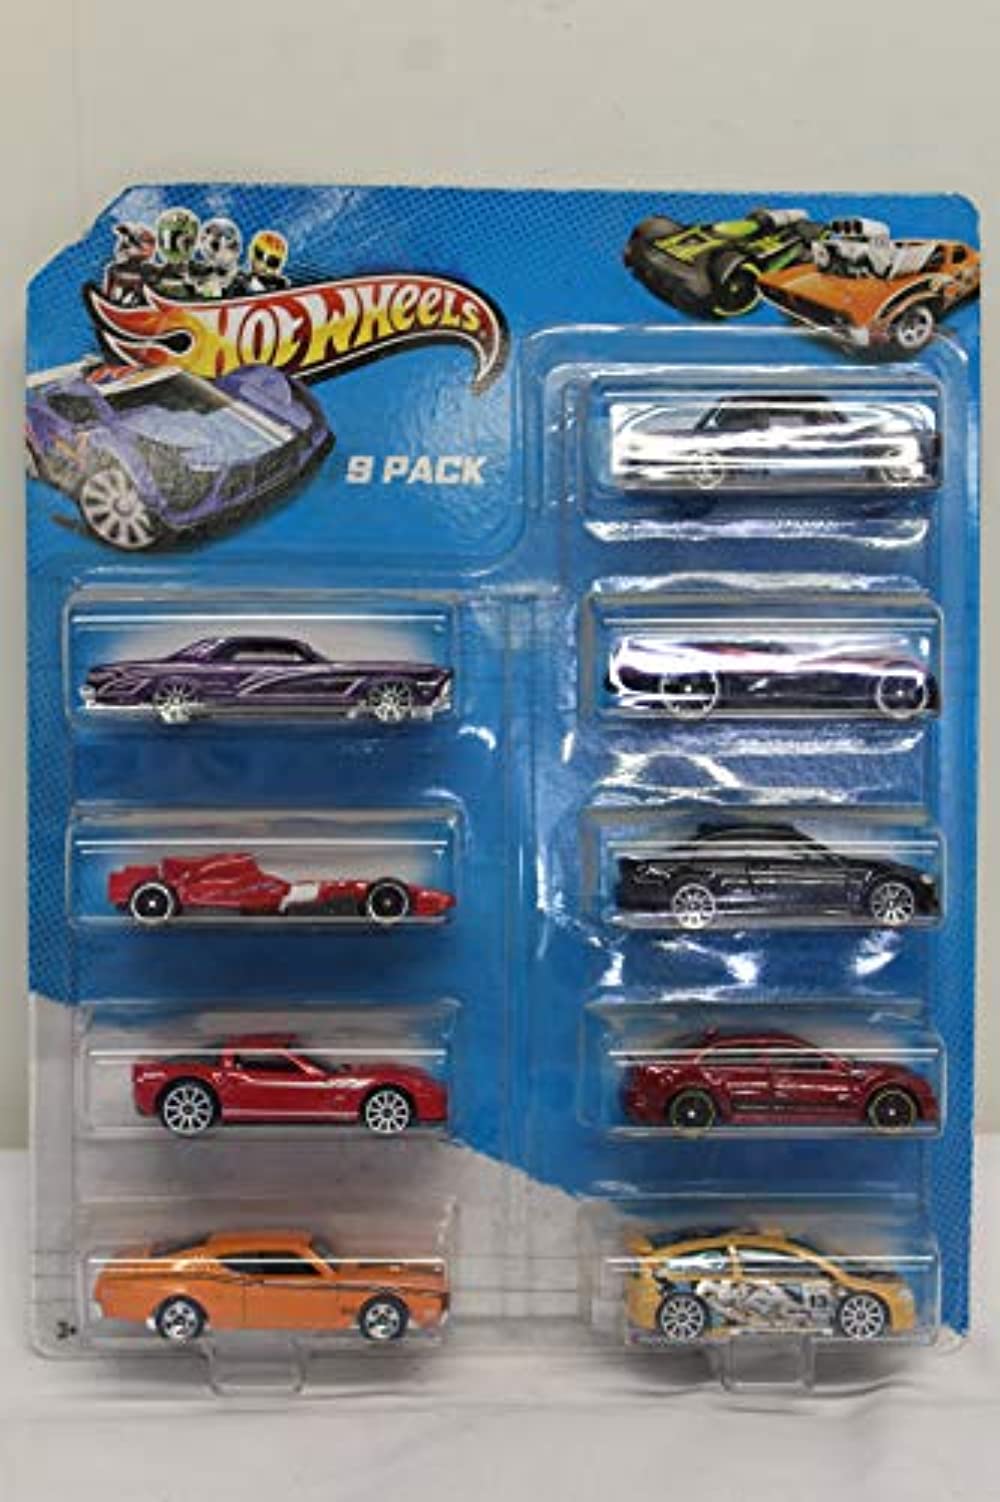 Hot Wheels 9 Pack - image 2 of 3